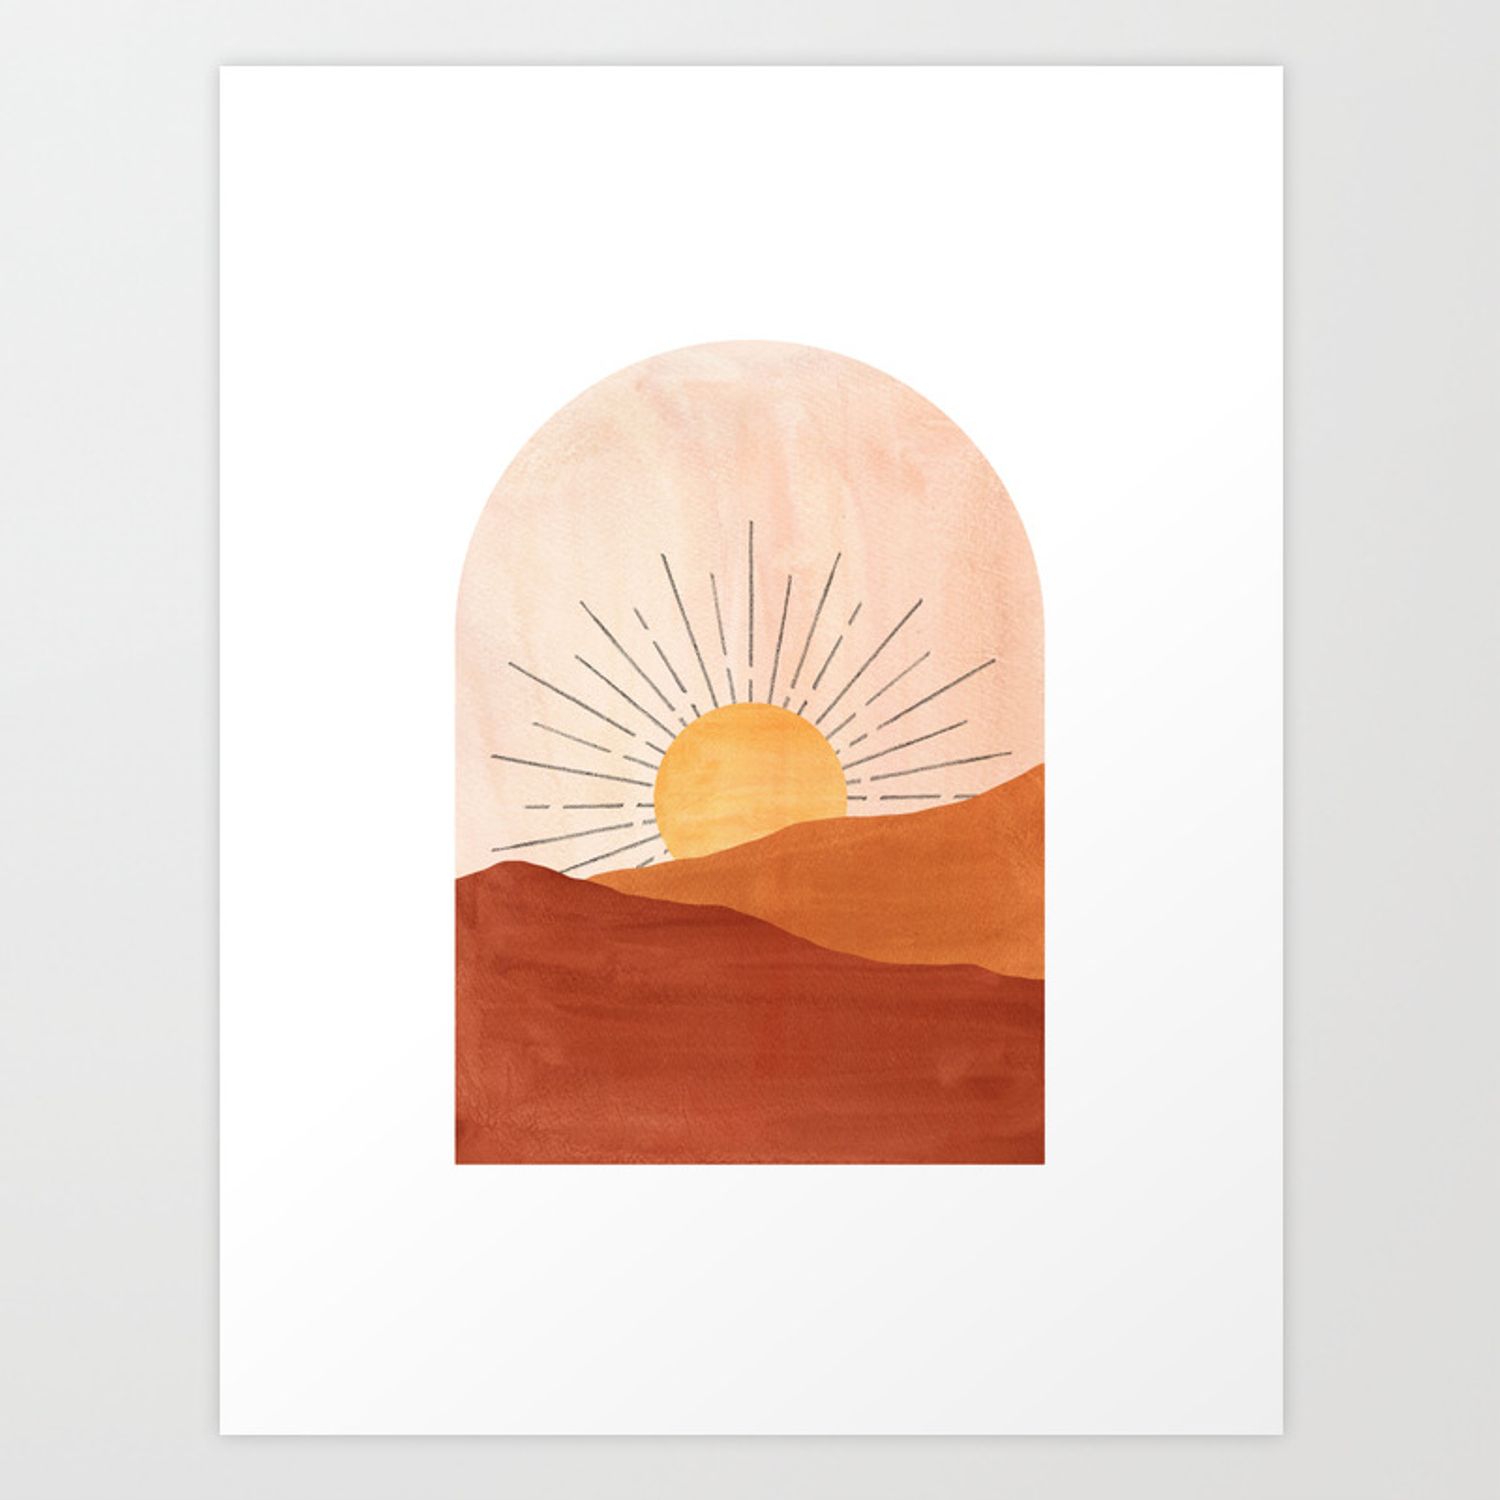 Abstract Terracotta Landscape, Sun And Desert, Sunrise #1 Art Print Whales Way | Society6 Inside Most Recent Abstract Terracotta Landscape Wall Art (View 4 of 20)